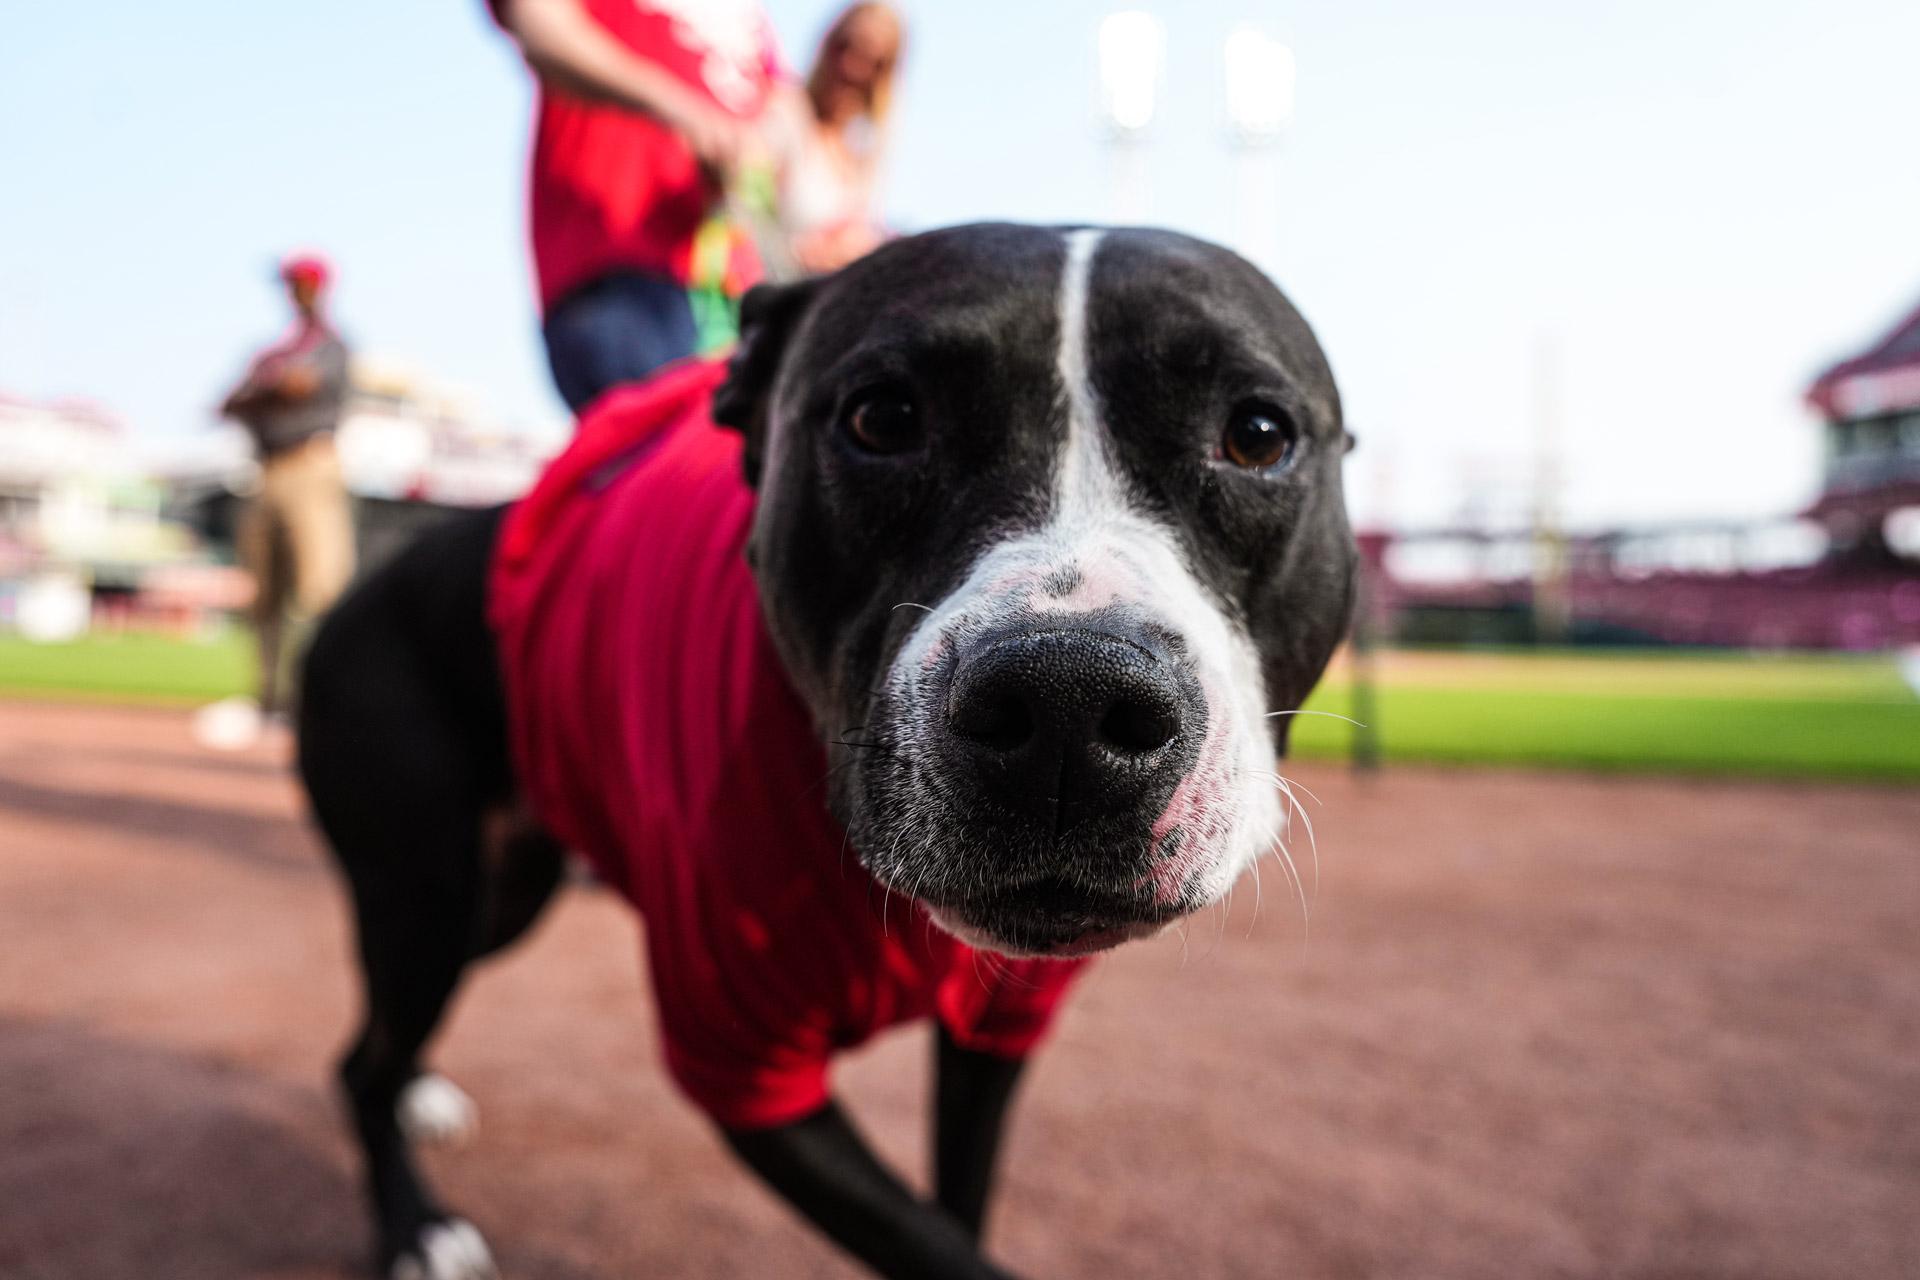 Pet Friendly Bark in the Park with the Cincinnati Reds